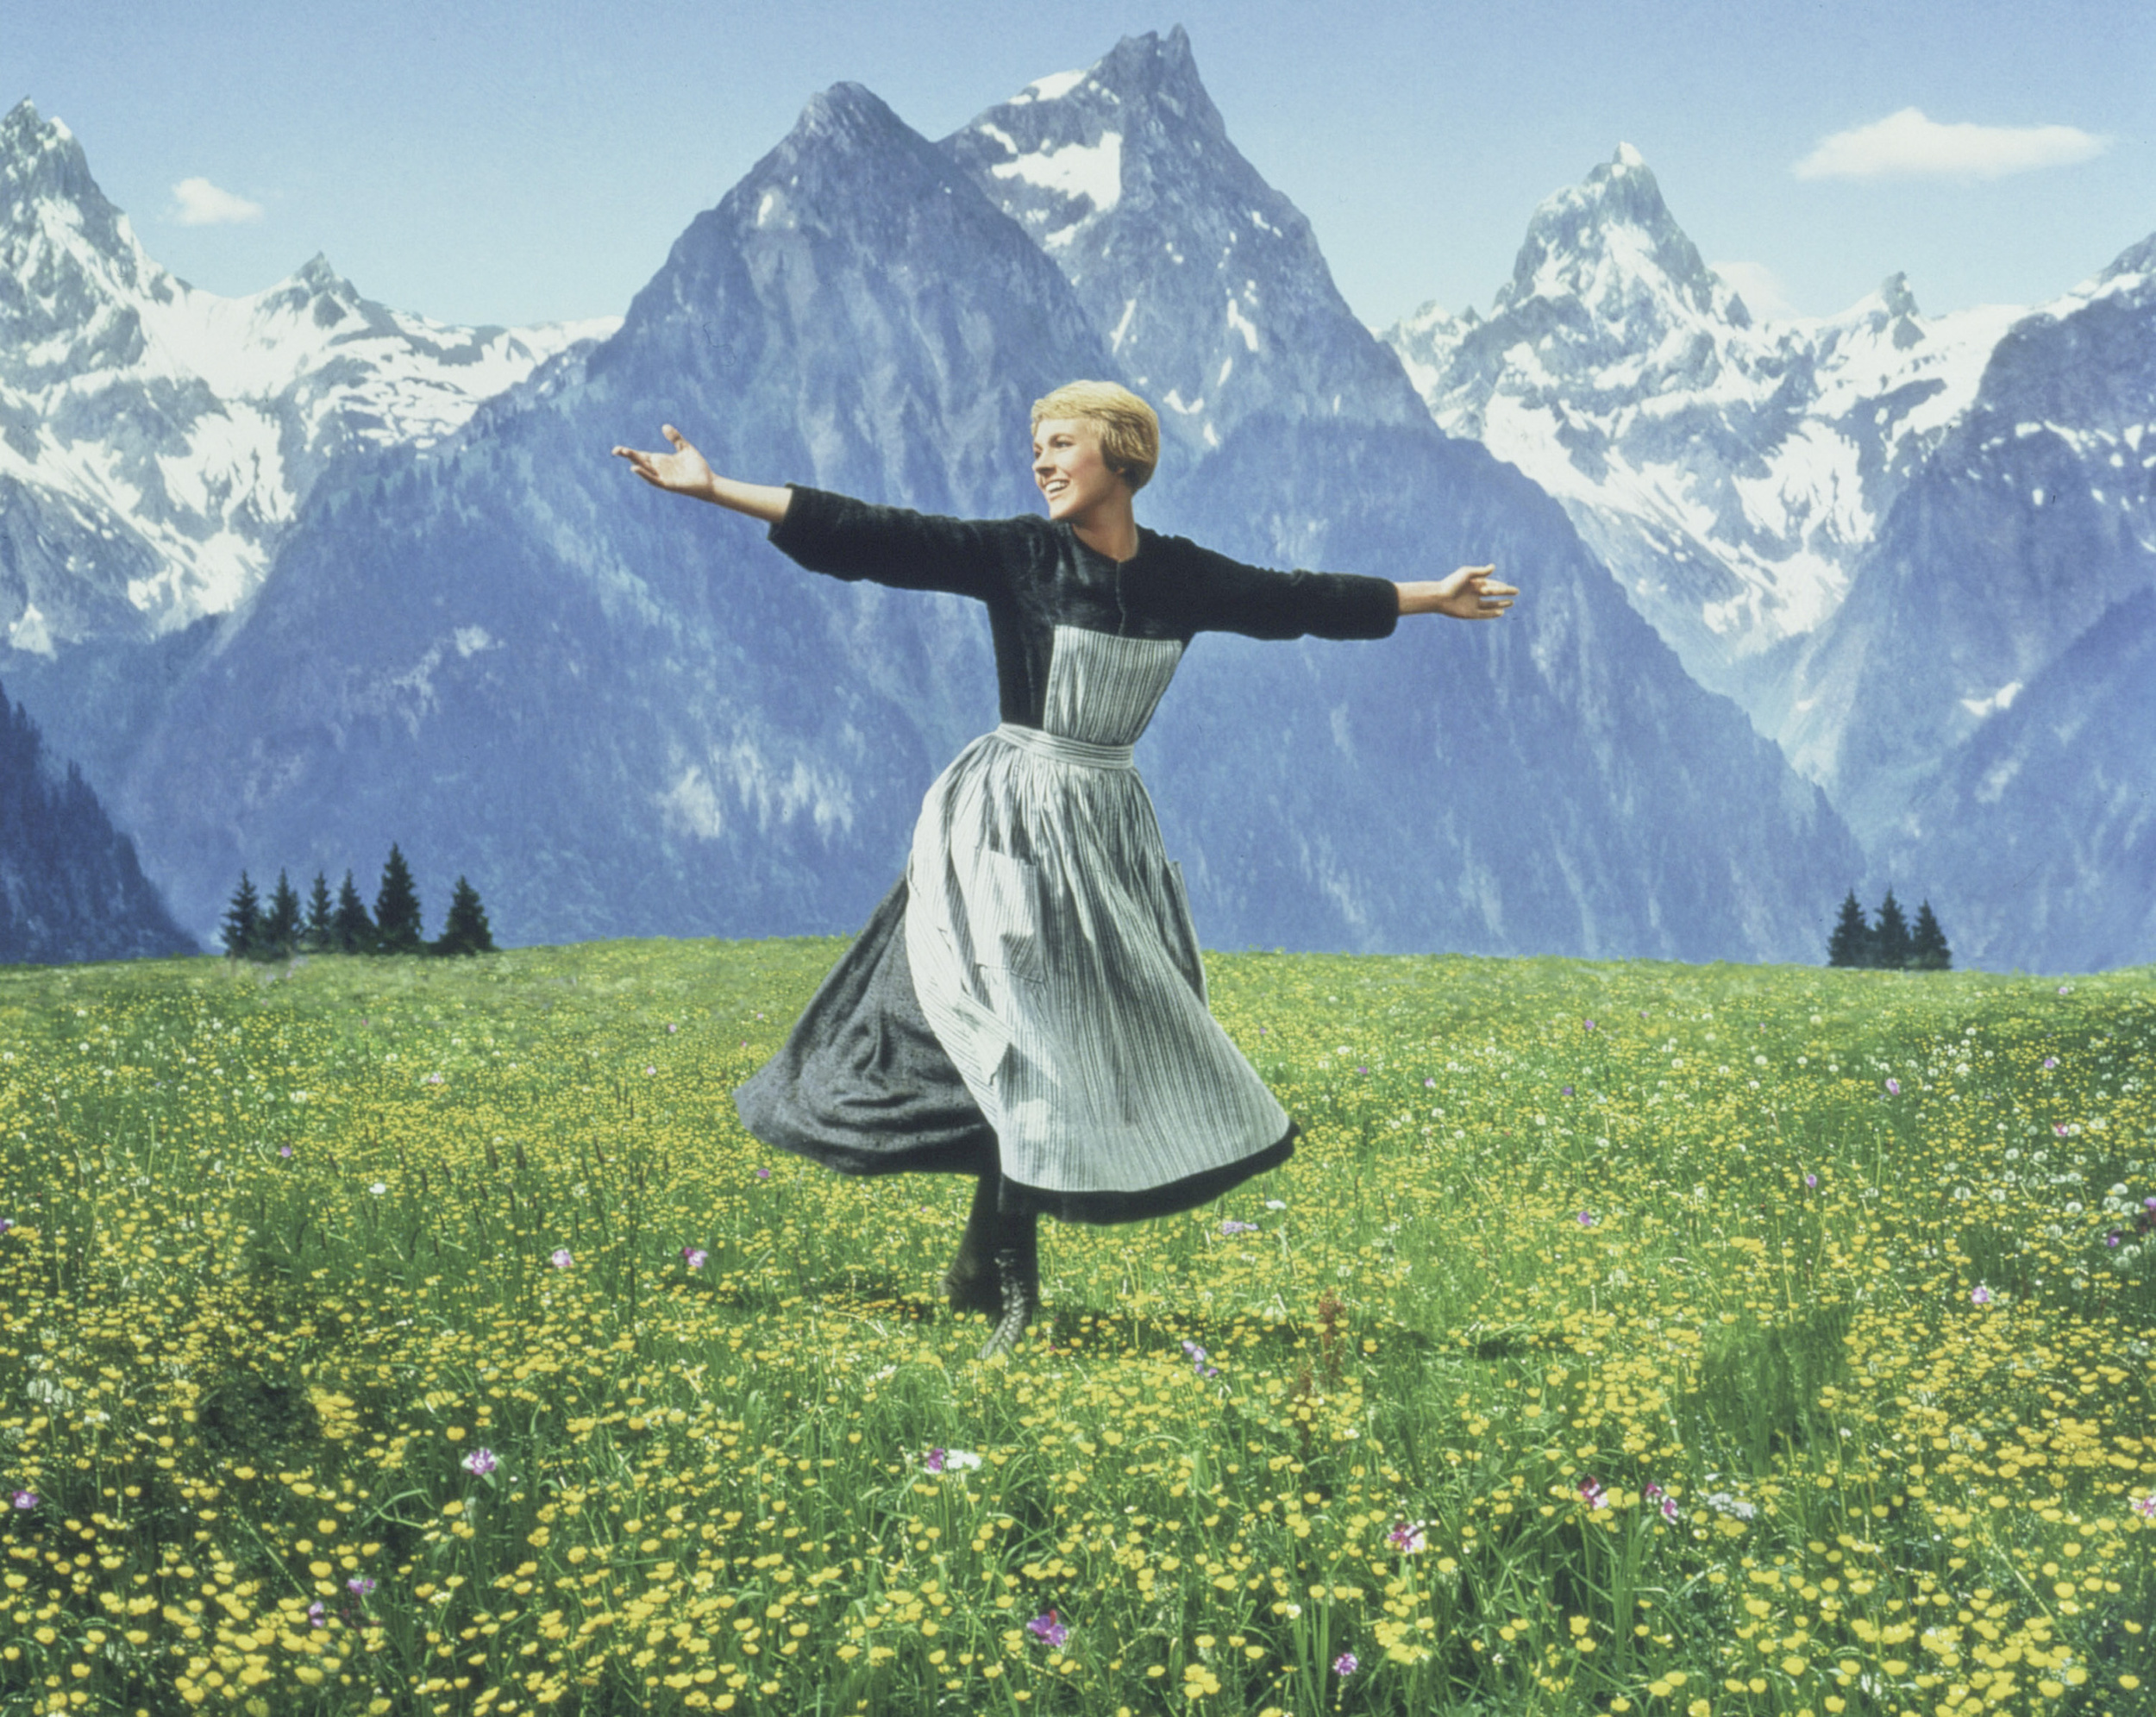 <p><em>The Sound of Music</em> isn’t just a musical; it’s a musical that opens with a song. Oh, and it doesn’t just open with a song but with the title song. The film's first line is, “The hills are alive with the sound of music.”</p><p><a href='https://www.msn.com/en-us/community/channel/vid-cj9pqbr0vn9in2b6ddcd8sfgpfq6x6utp44fssrv6mc2gtybw0us'>Follow us on MSN to see more of our exclusive entertainment content.</a></p>